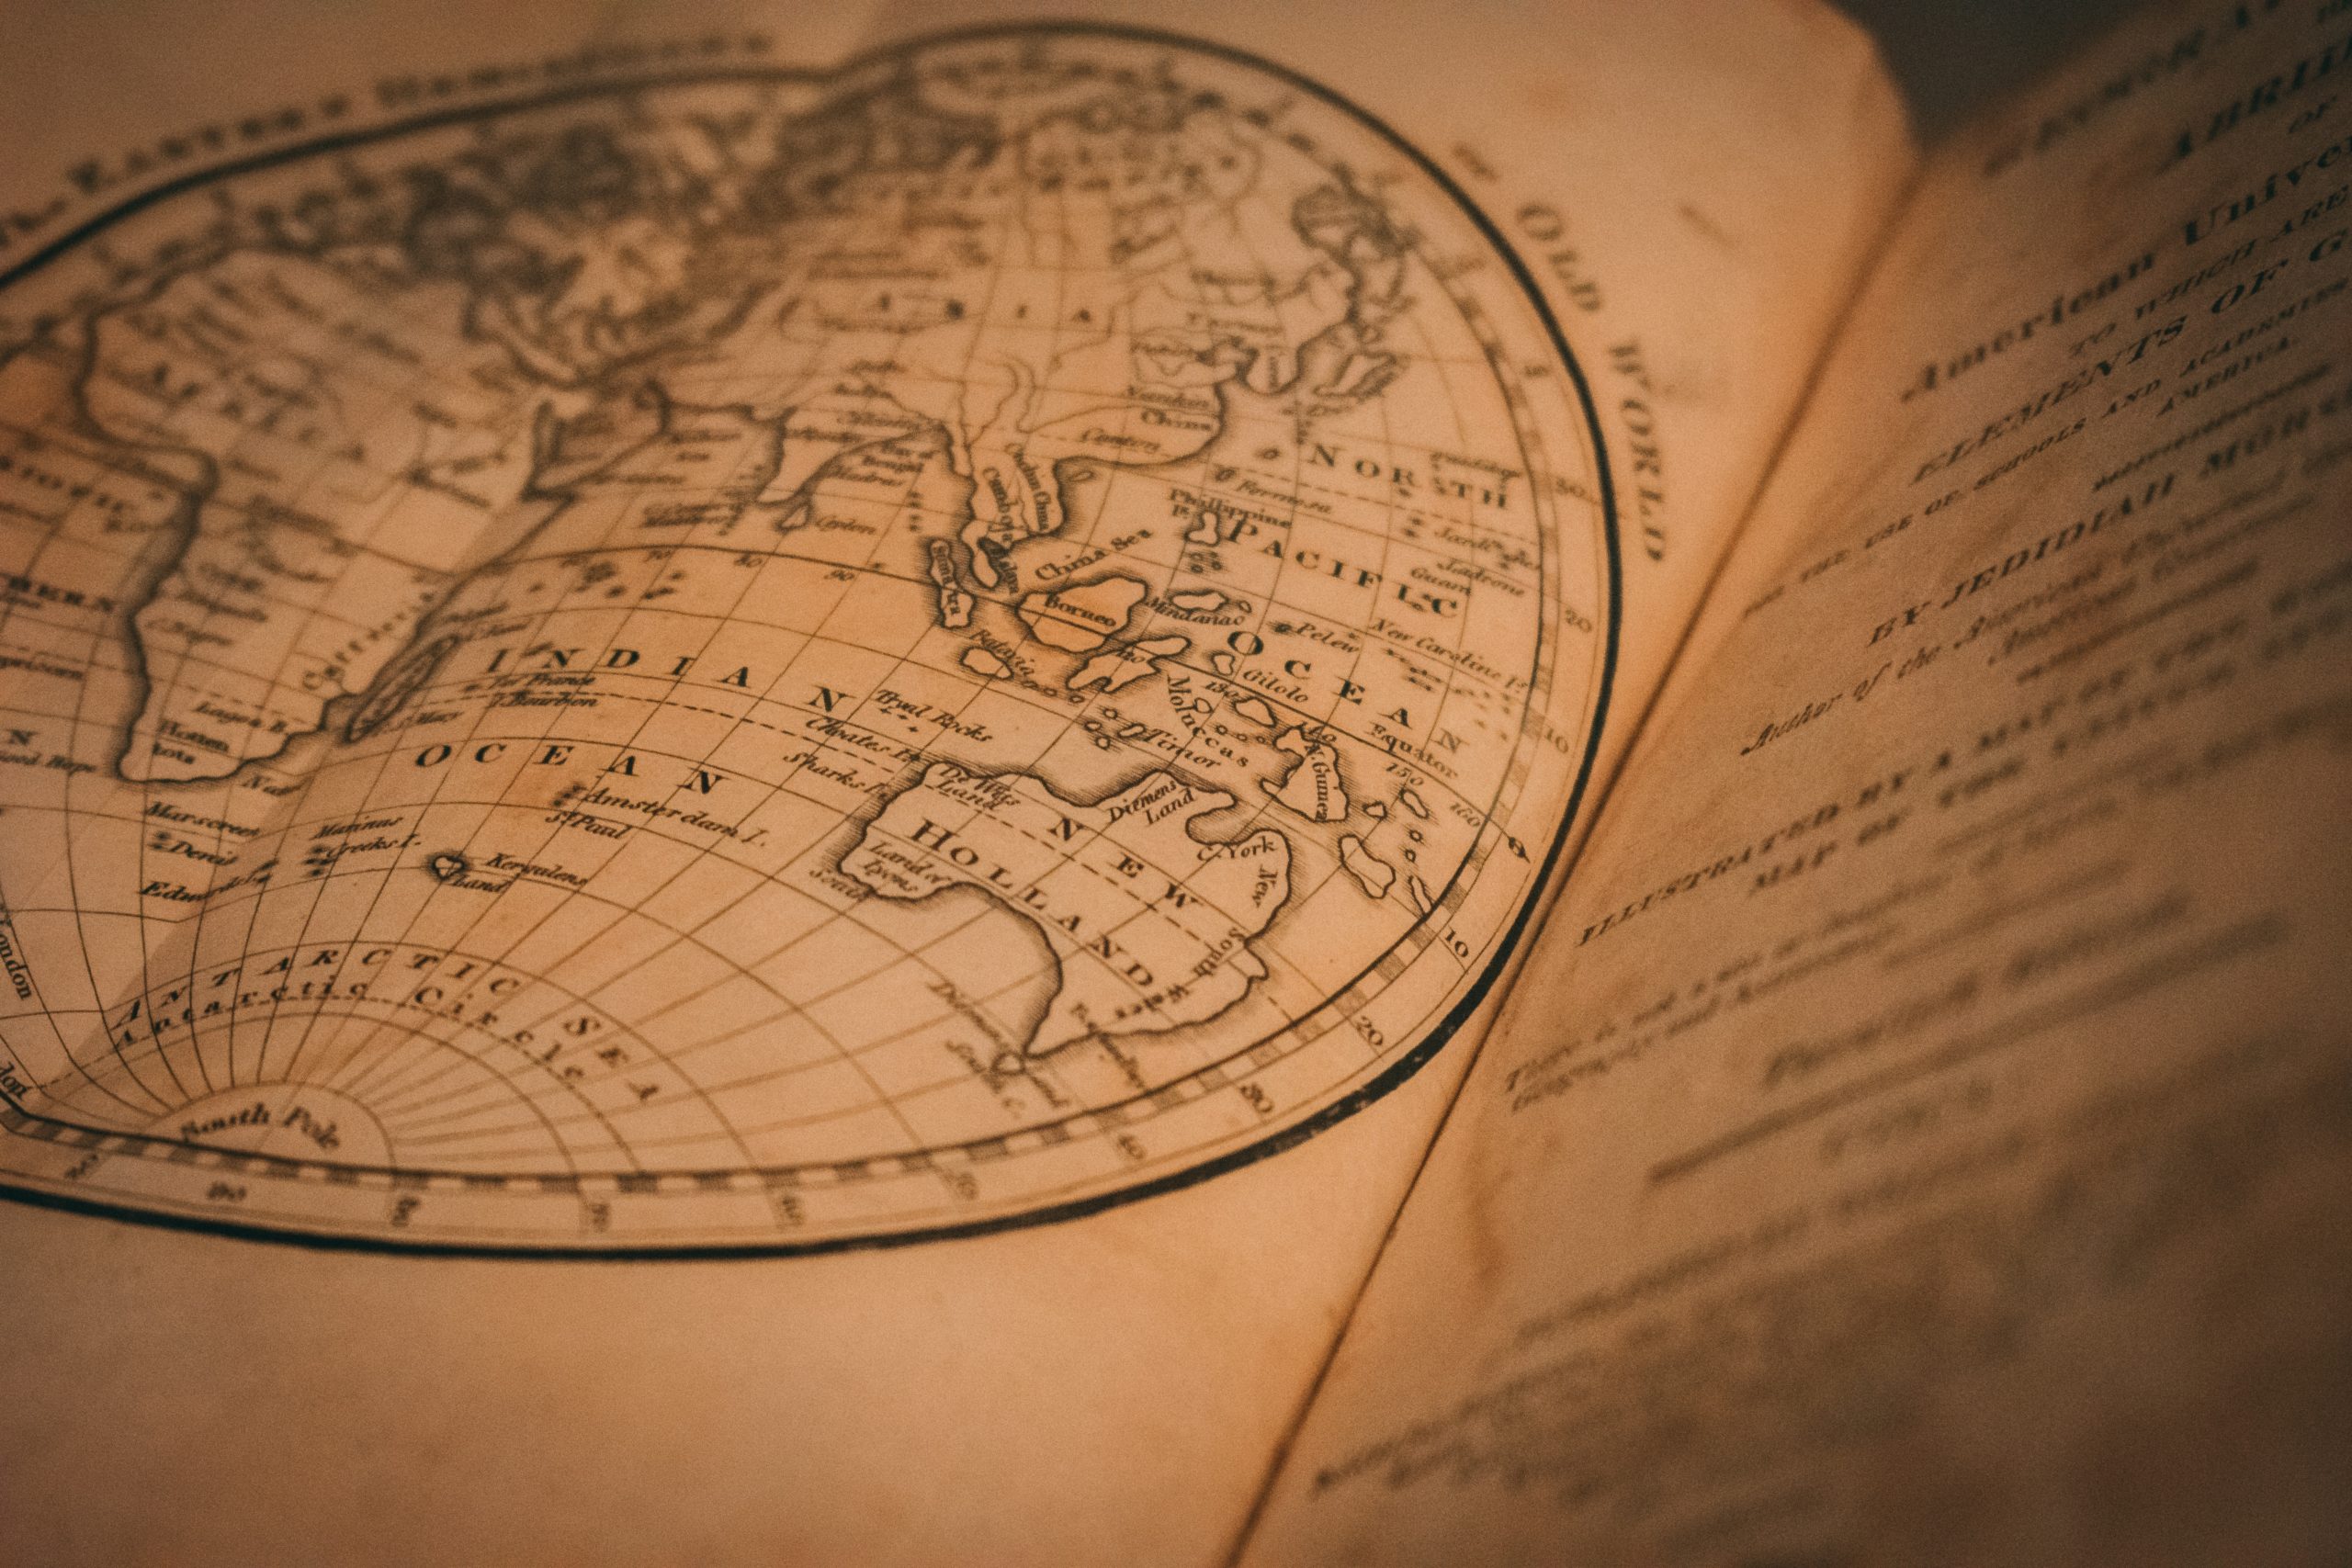 The Impacts of Corporate Globalization: How the Dutch East India Company Changed the World